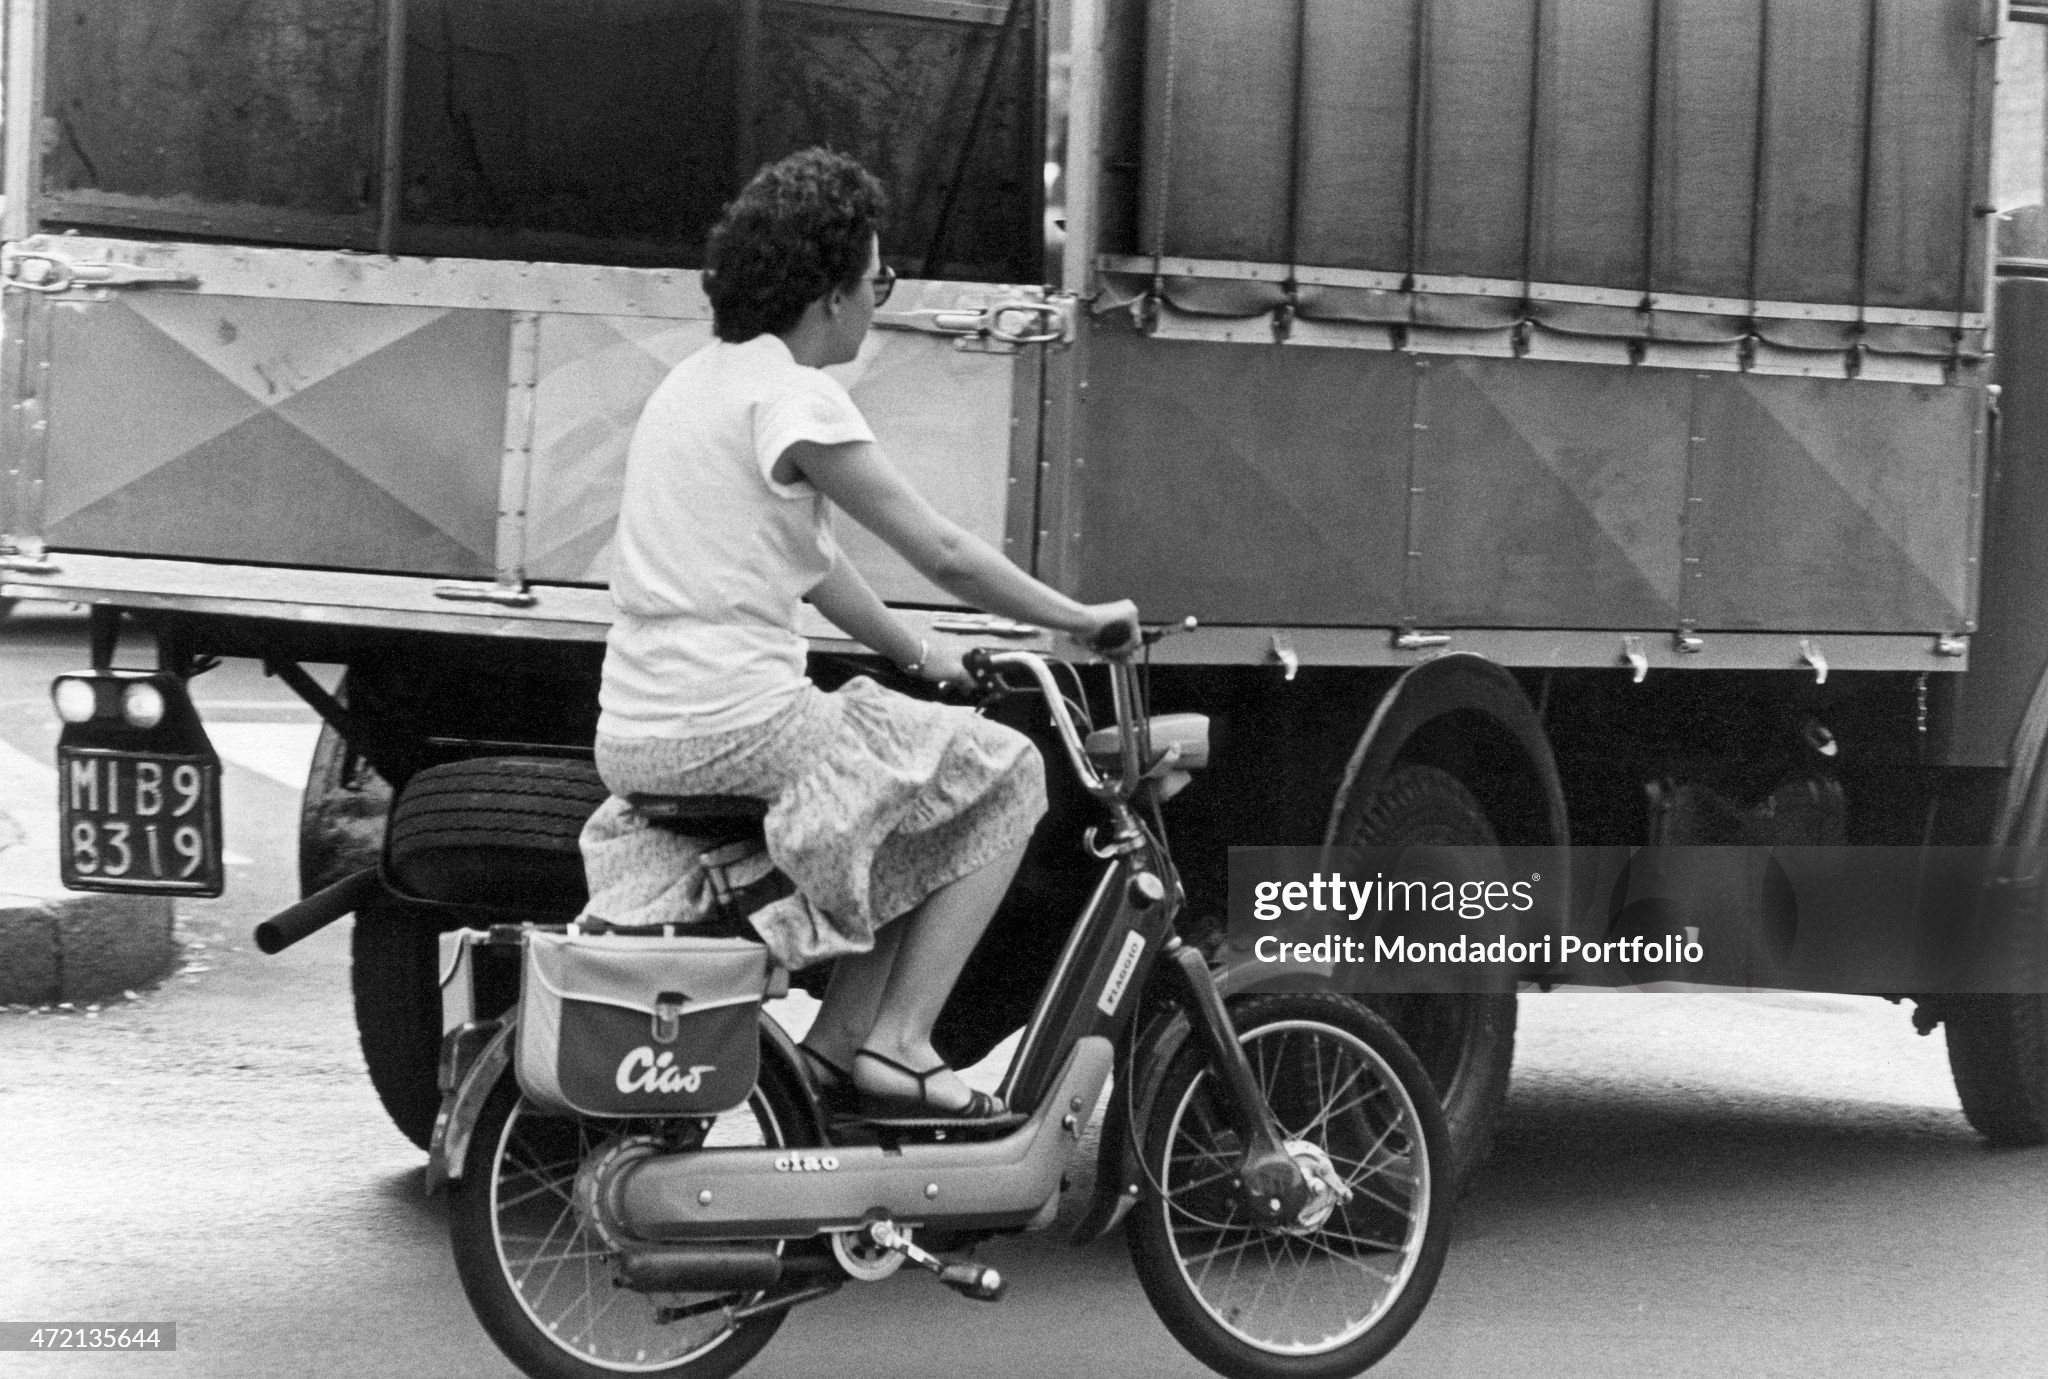 A girl riding a Piaggio Ciao moped in Milan in 1970s. 